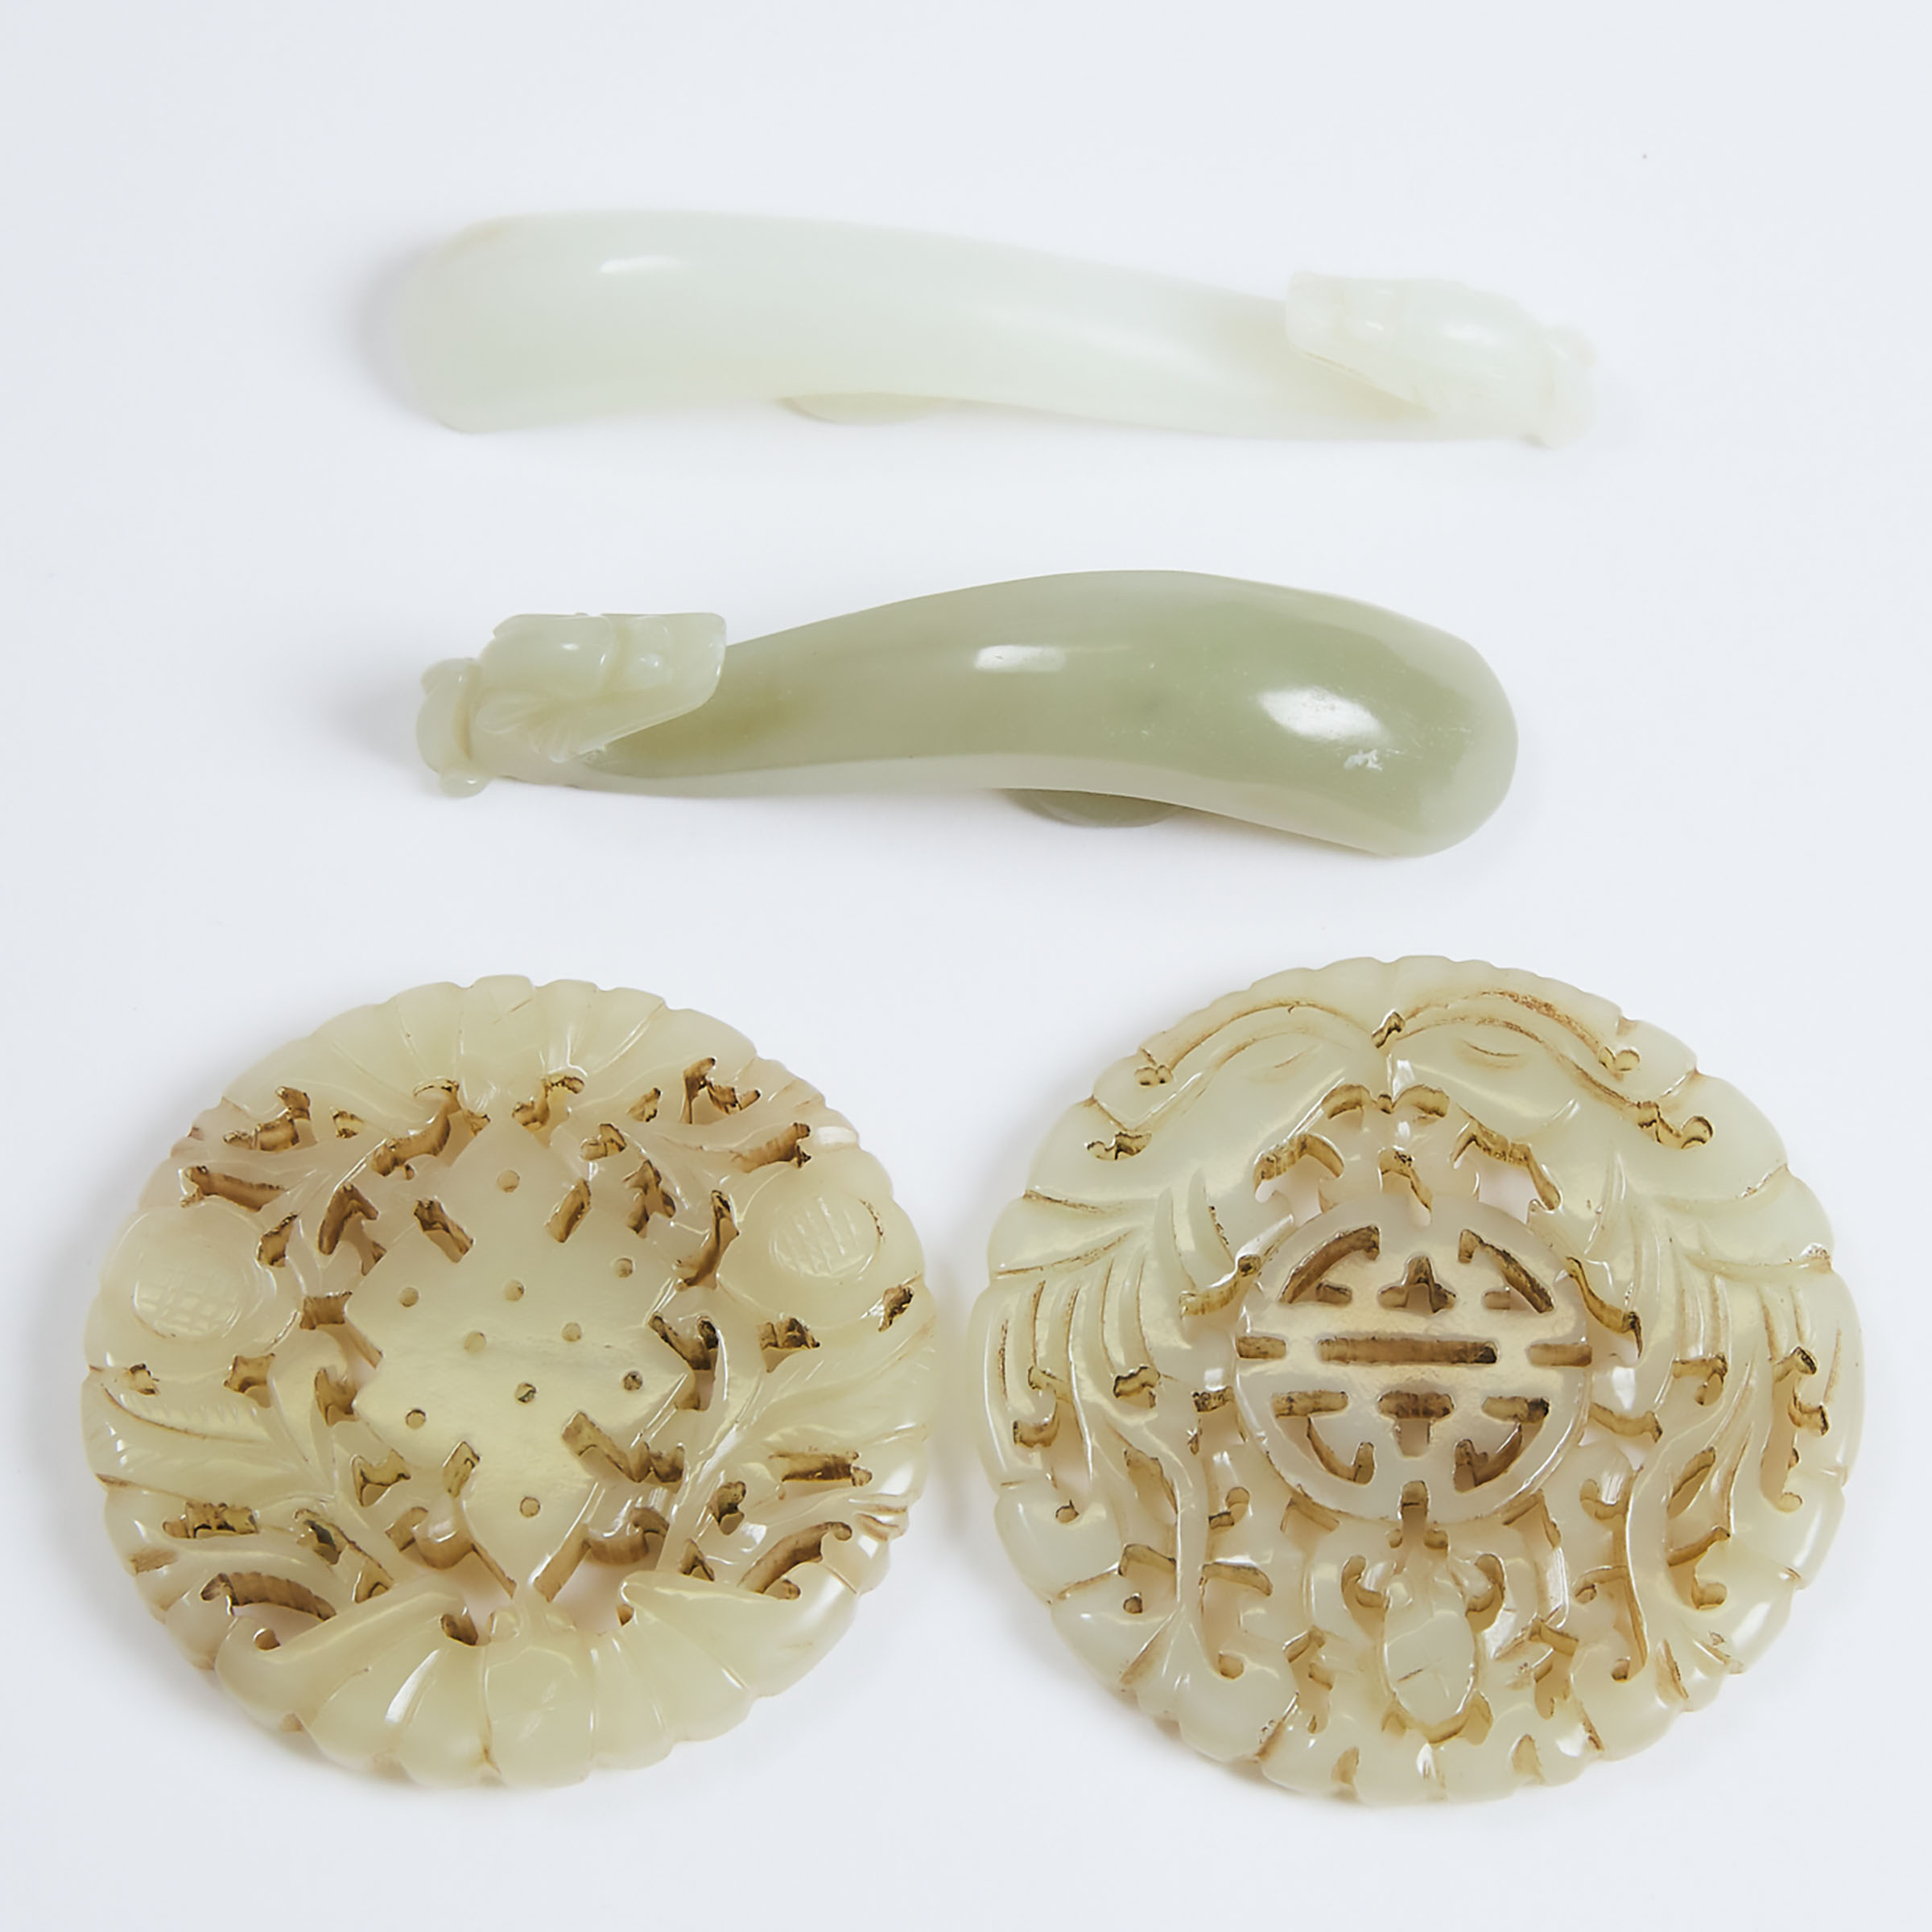 A Group of Four White and Celadon Jade Carvings